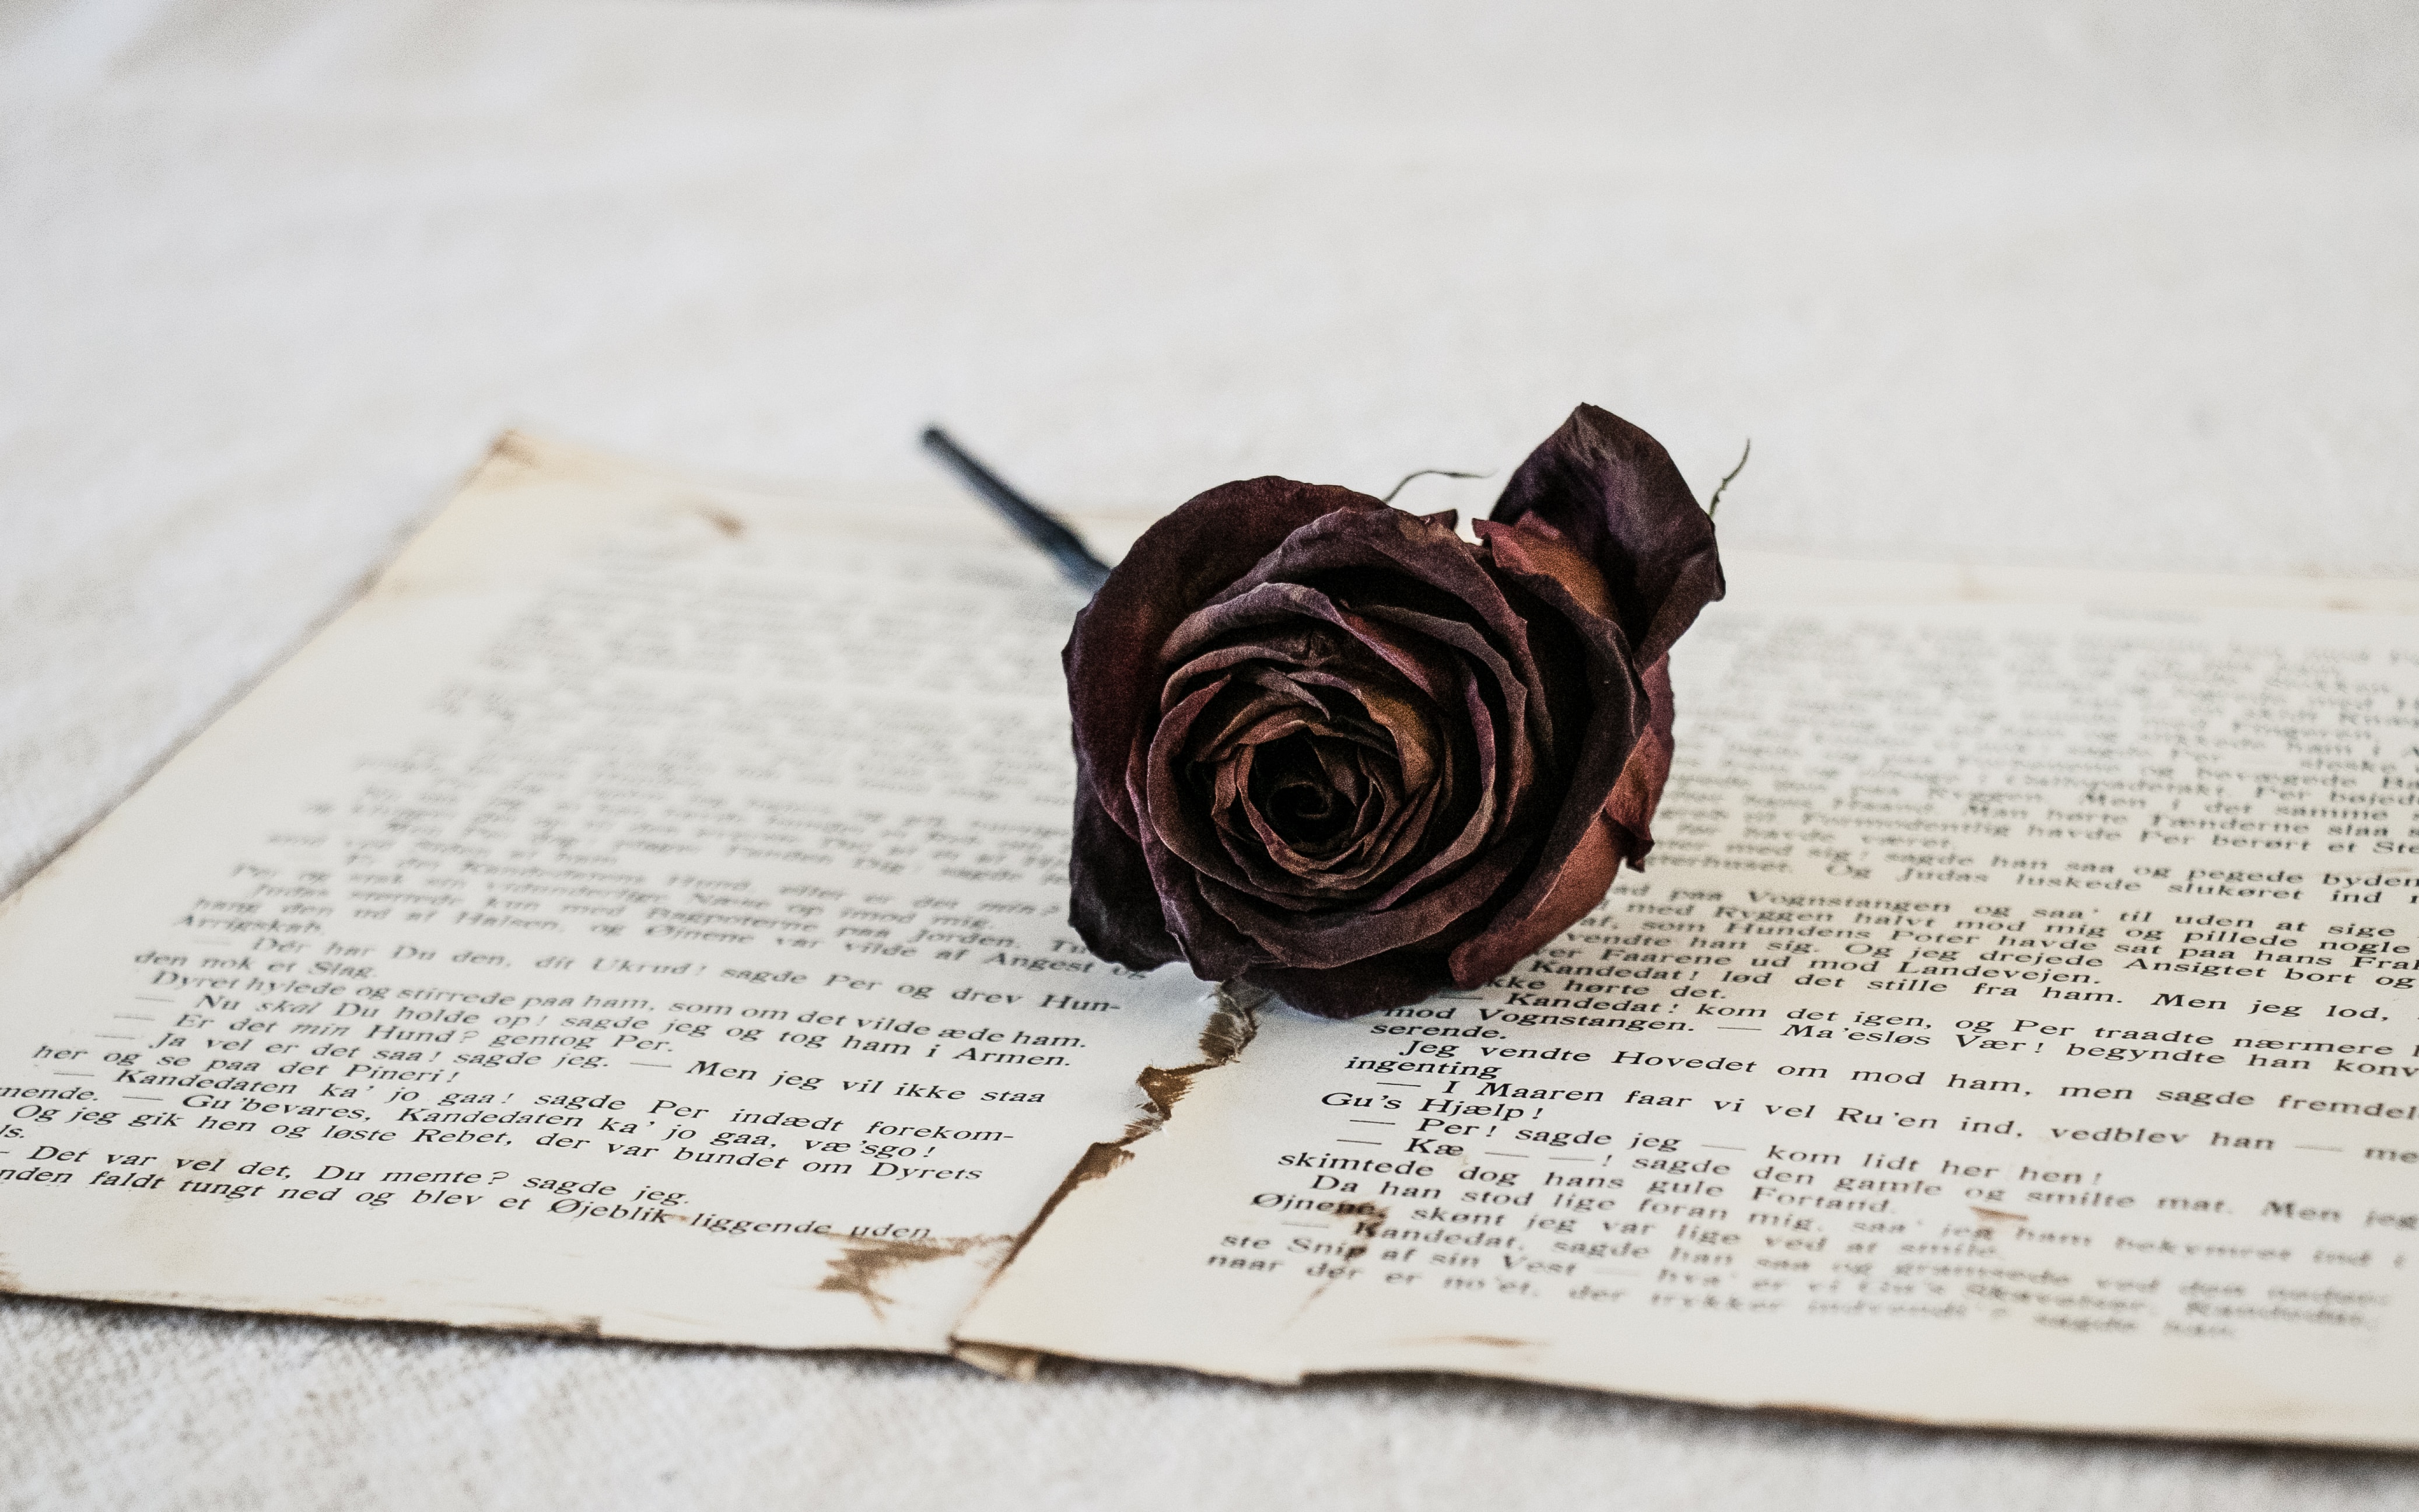 flowers, flower, rose flower, rose, dry, pages, page